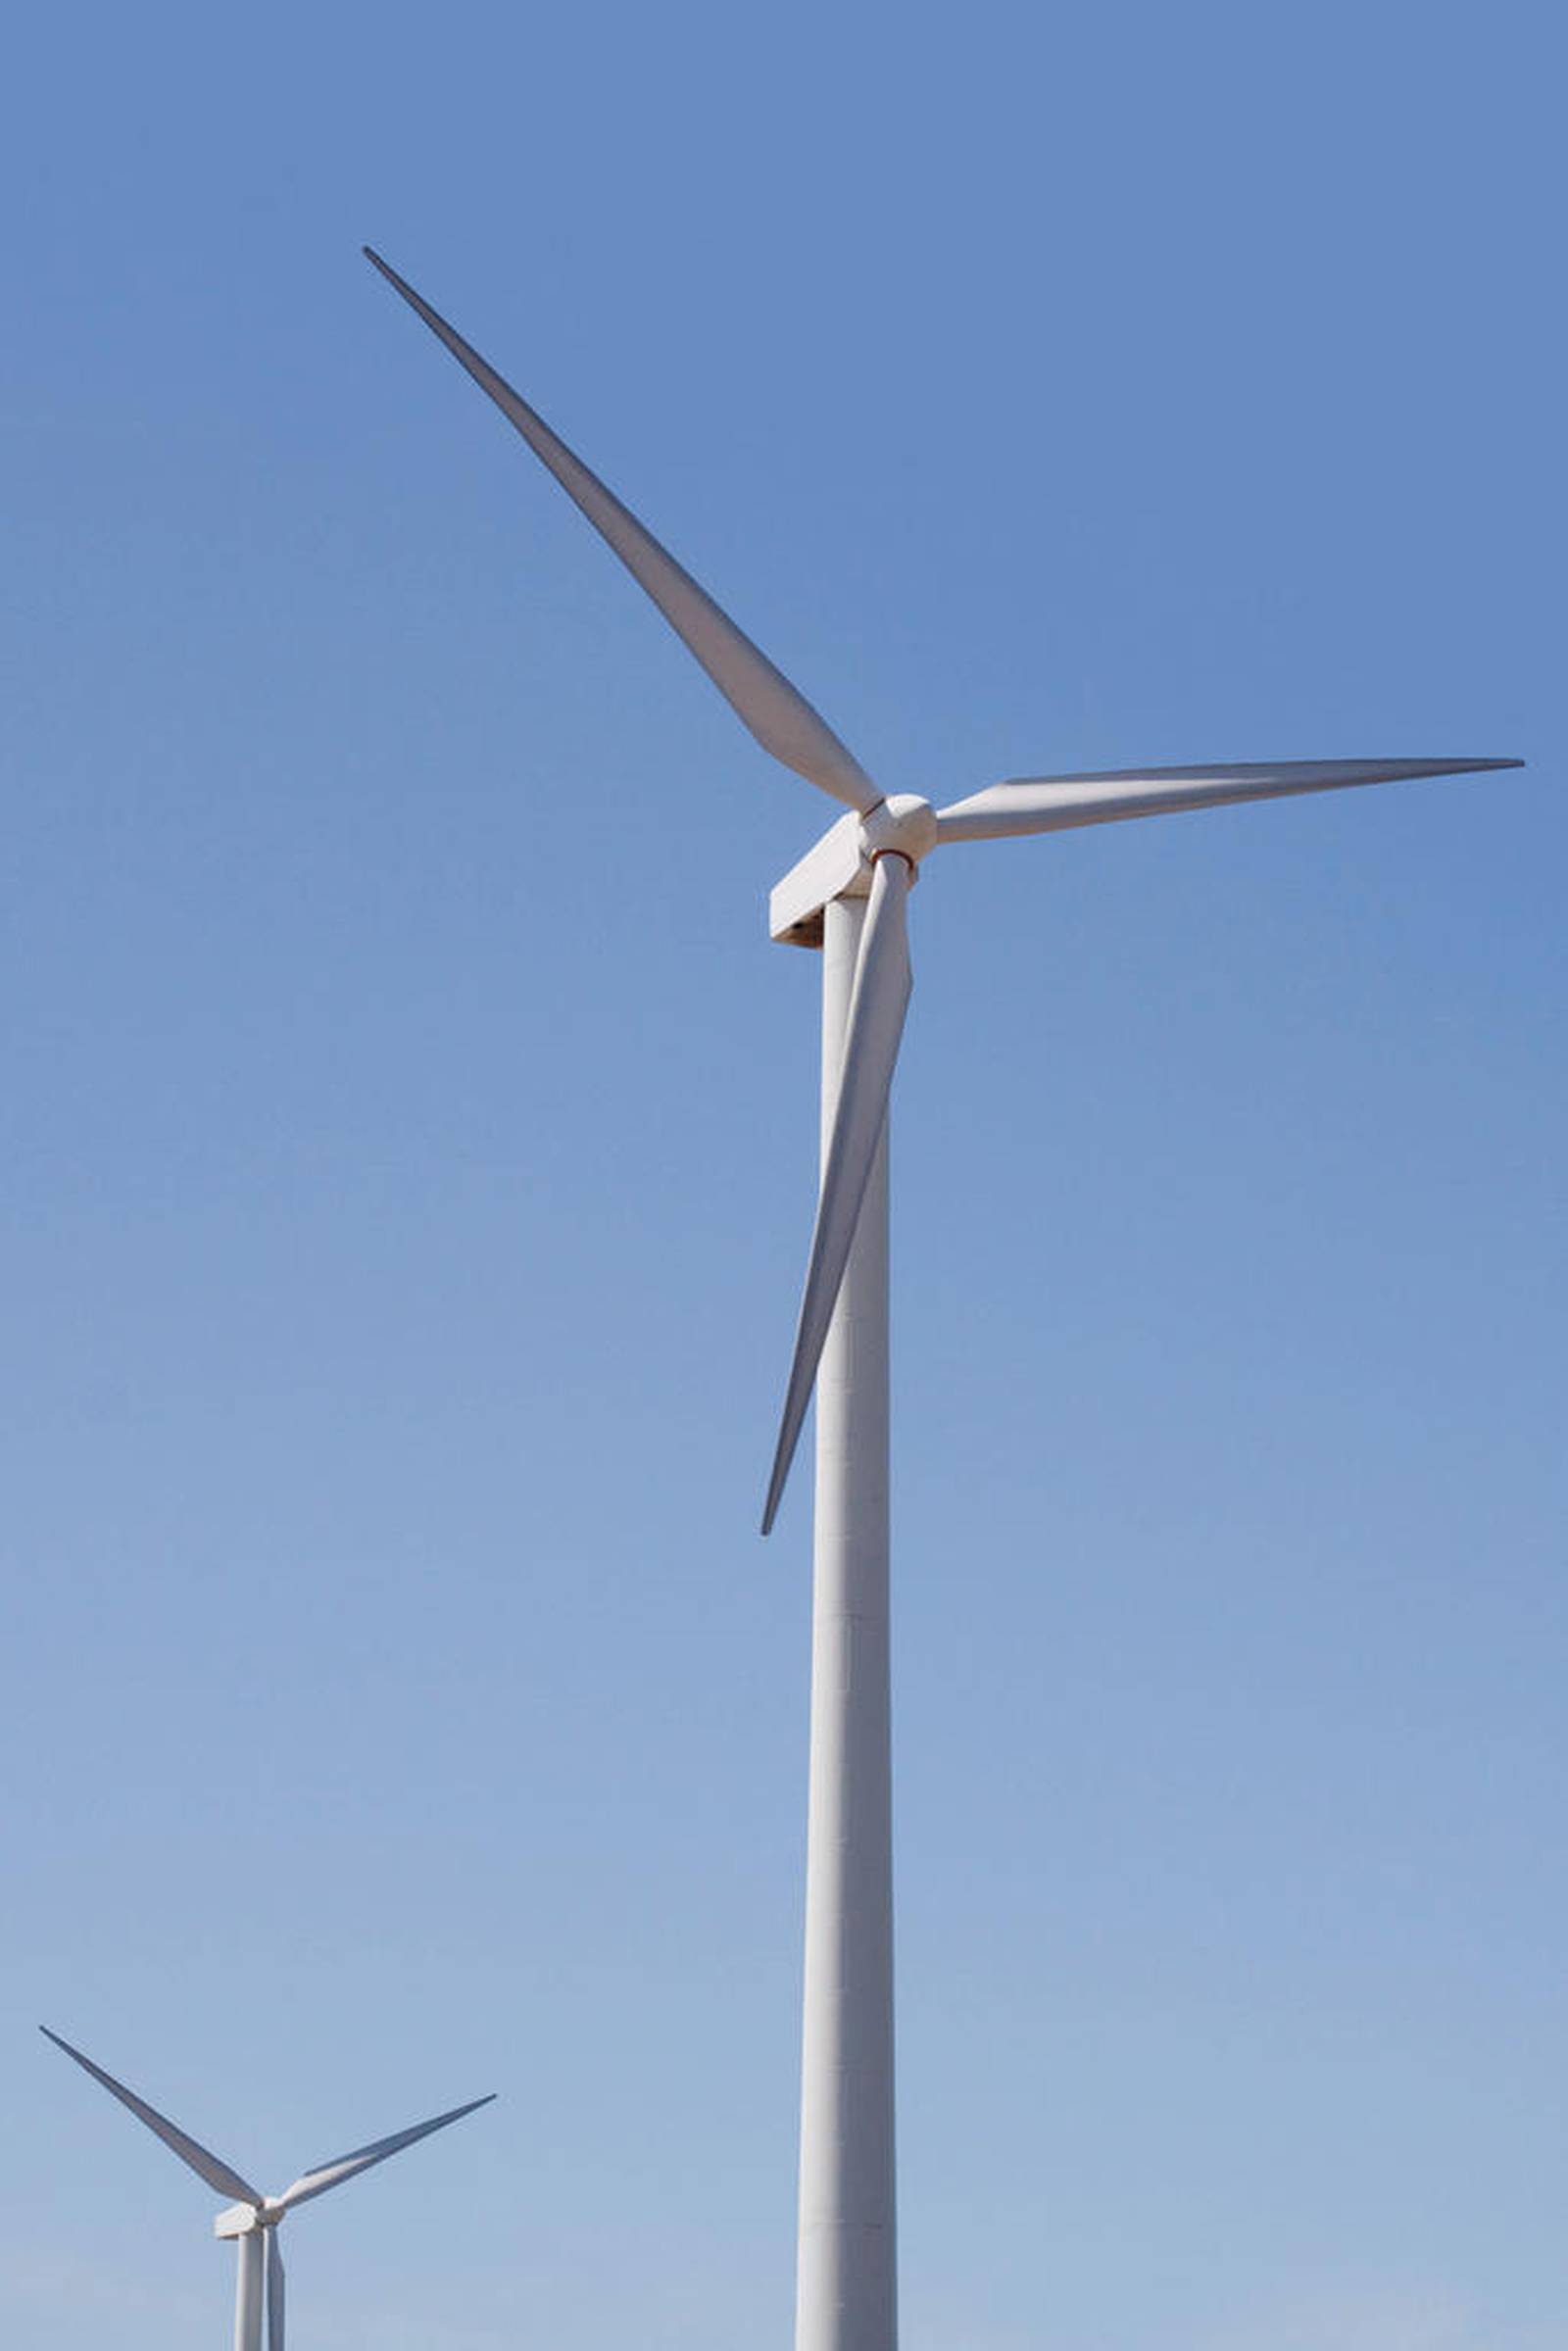 alliant-energy-to-add-more-wind-energy-in-iowa-newton-daily-news